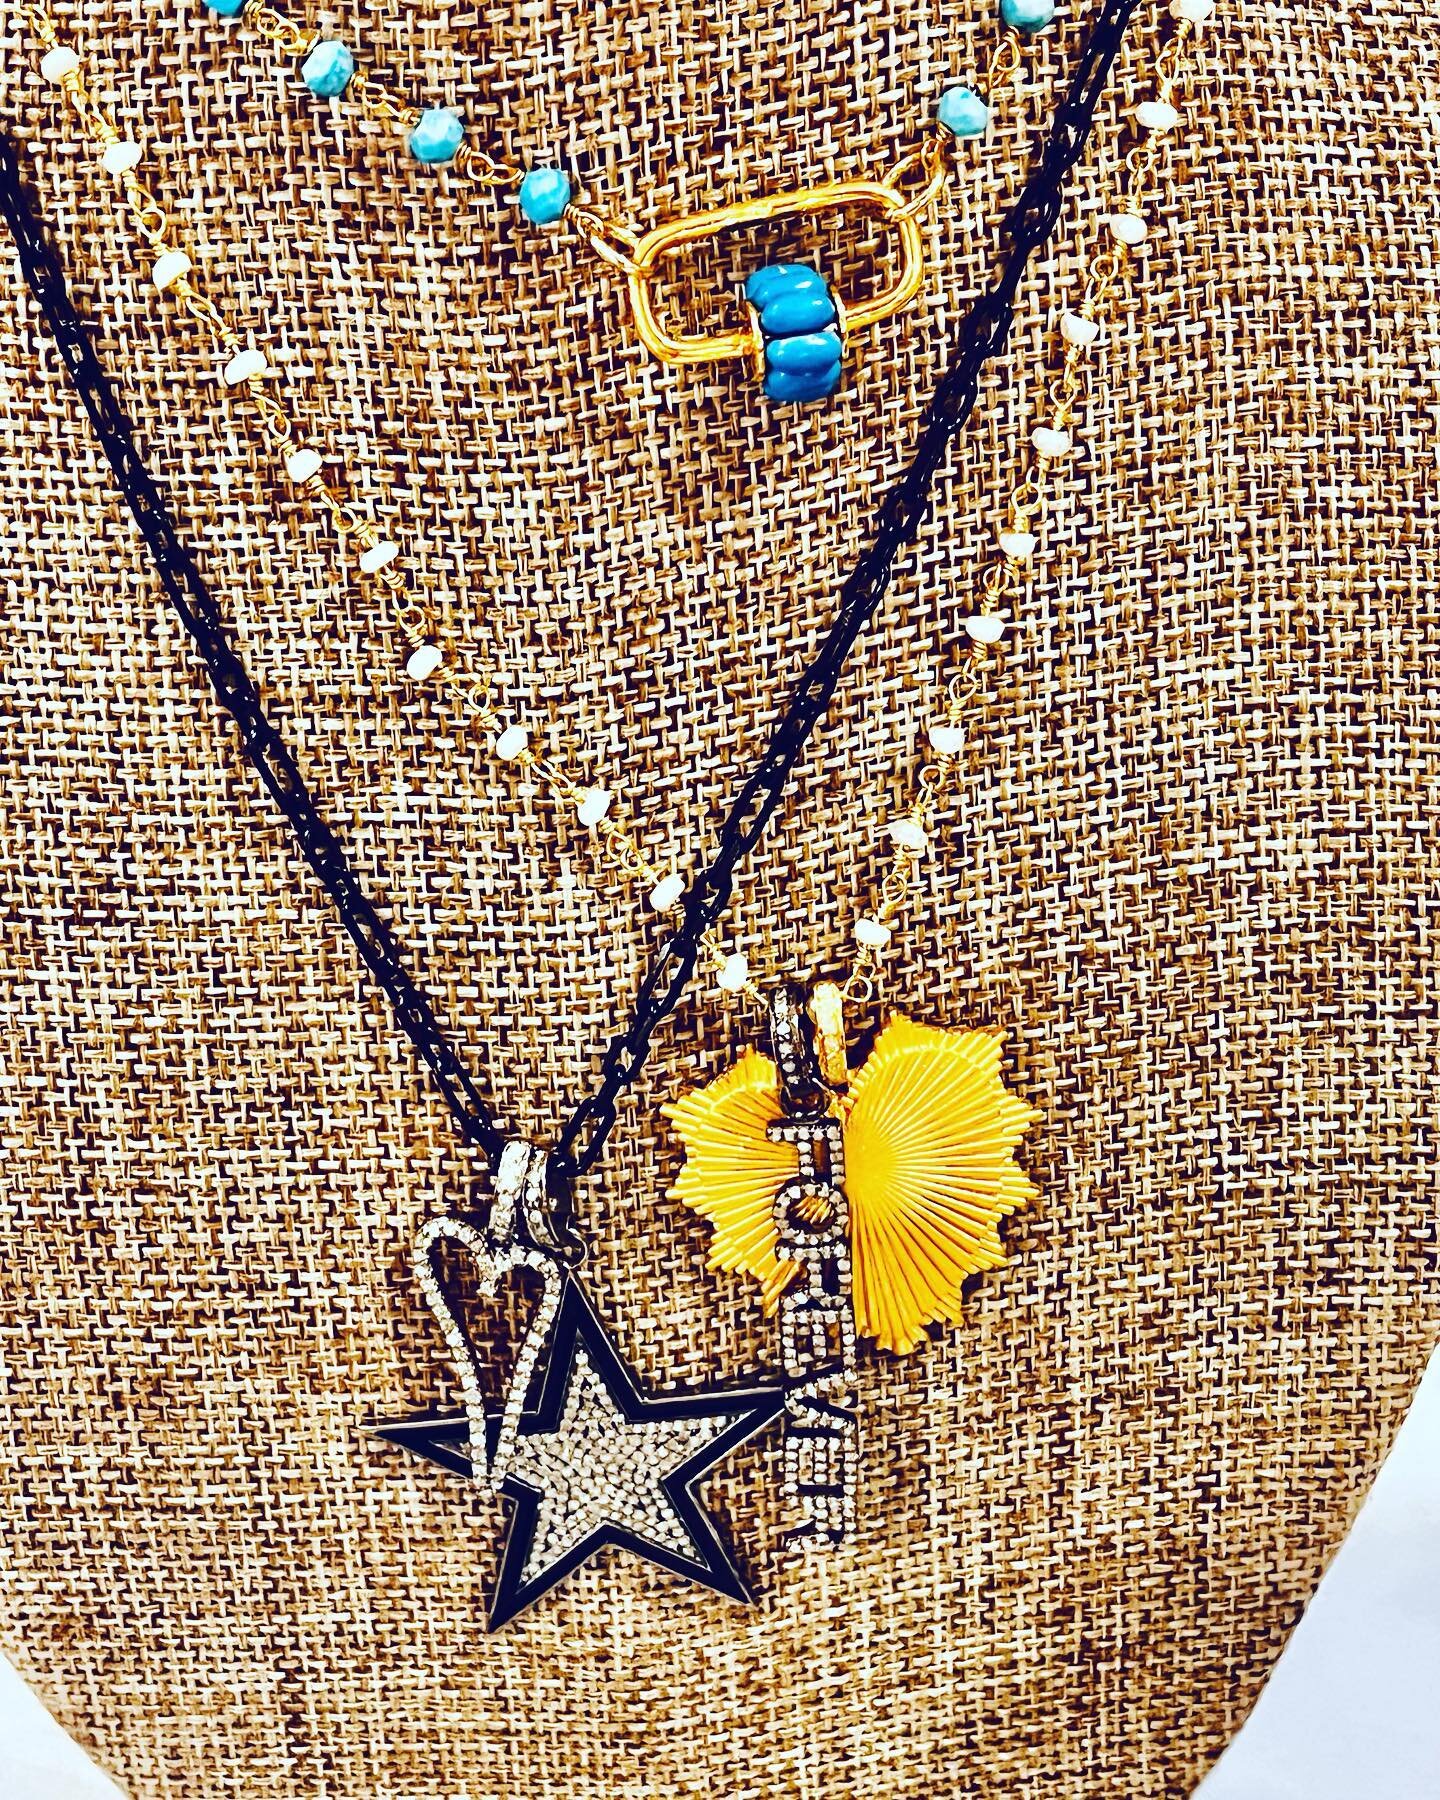 Don&rsquo;t be afraid to MIX IT UP!

.
.
.
.
.
#enamel #gold #silver #pearls #turquoise #expressyourself #stars #💛 #santos_jewellery